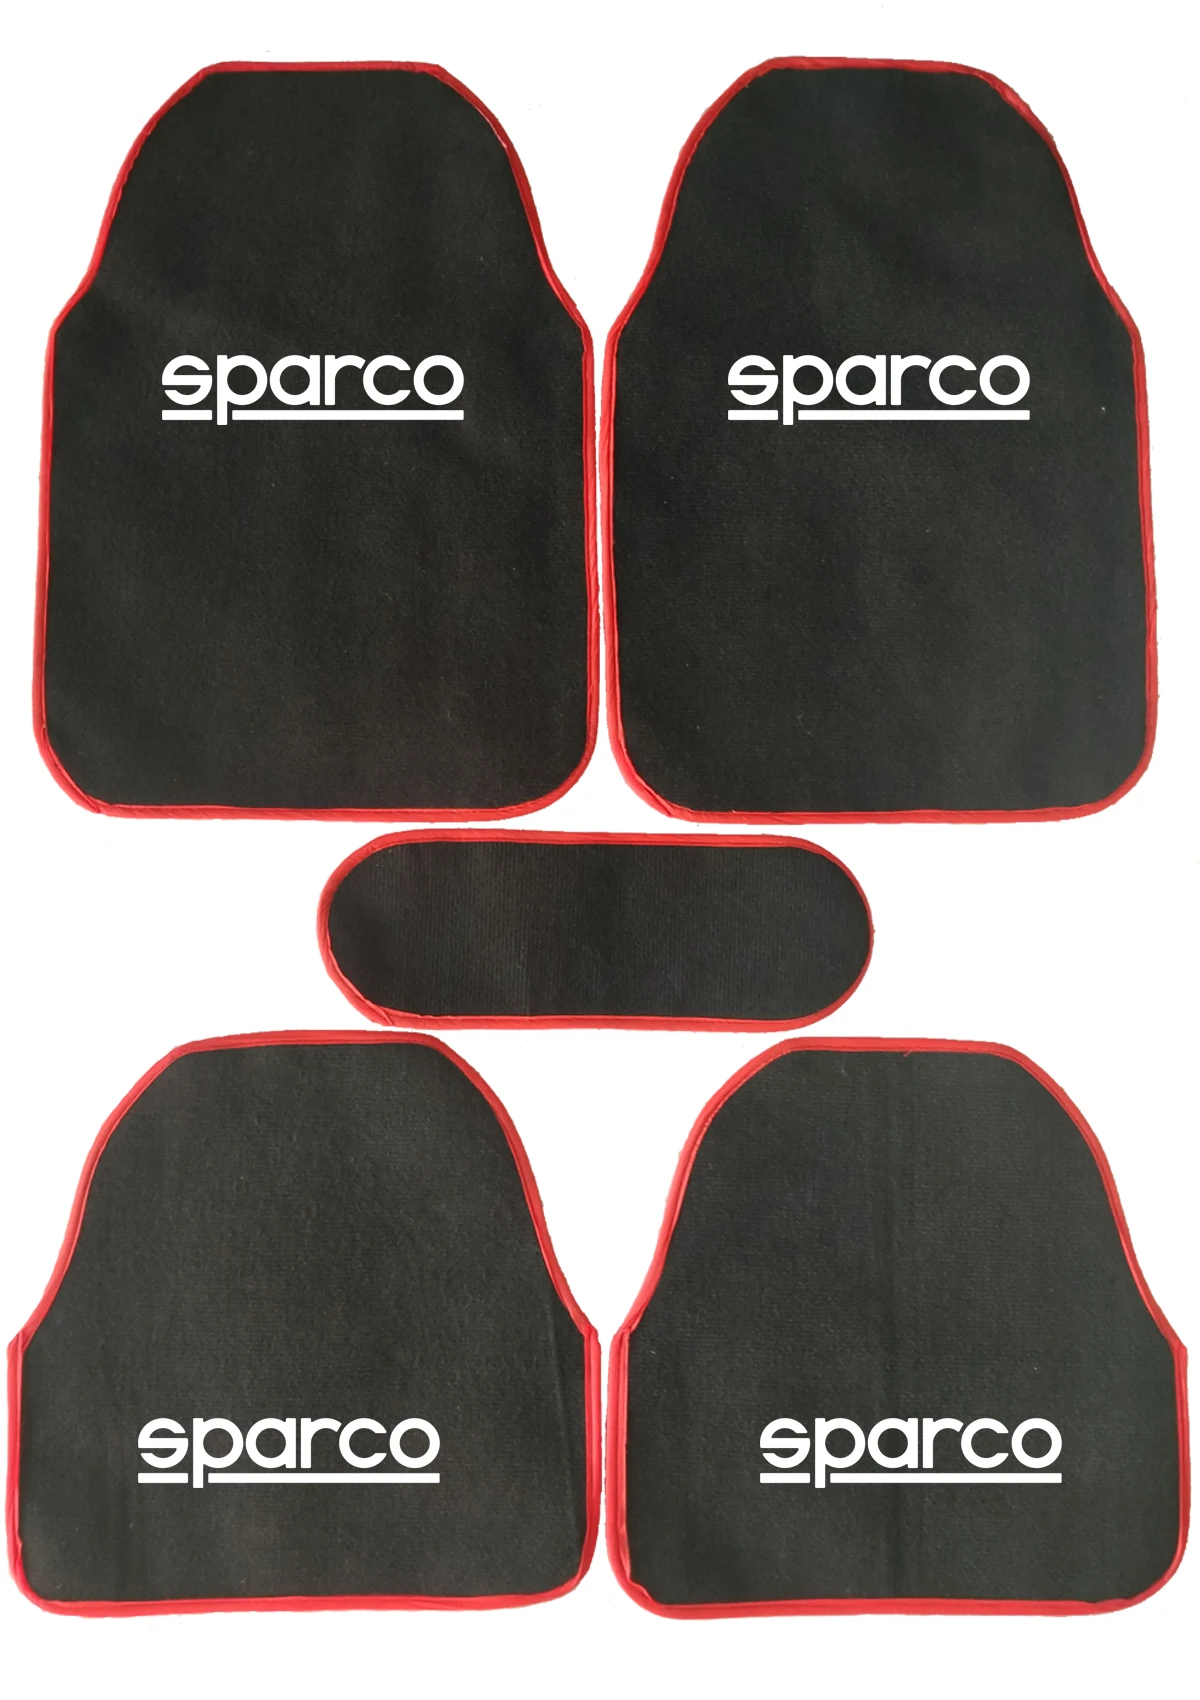 

AUTO CARPET MAT, CUSTOM MADE AUTO CARPET MAT WITH COMPATIBLE LOGO FOR SPARCO, FITS ALL BRAND MODEL VEHICLES,SPECIAL PRINTED MATS